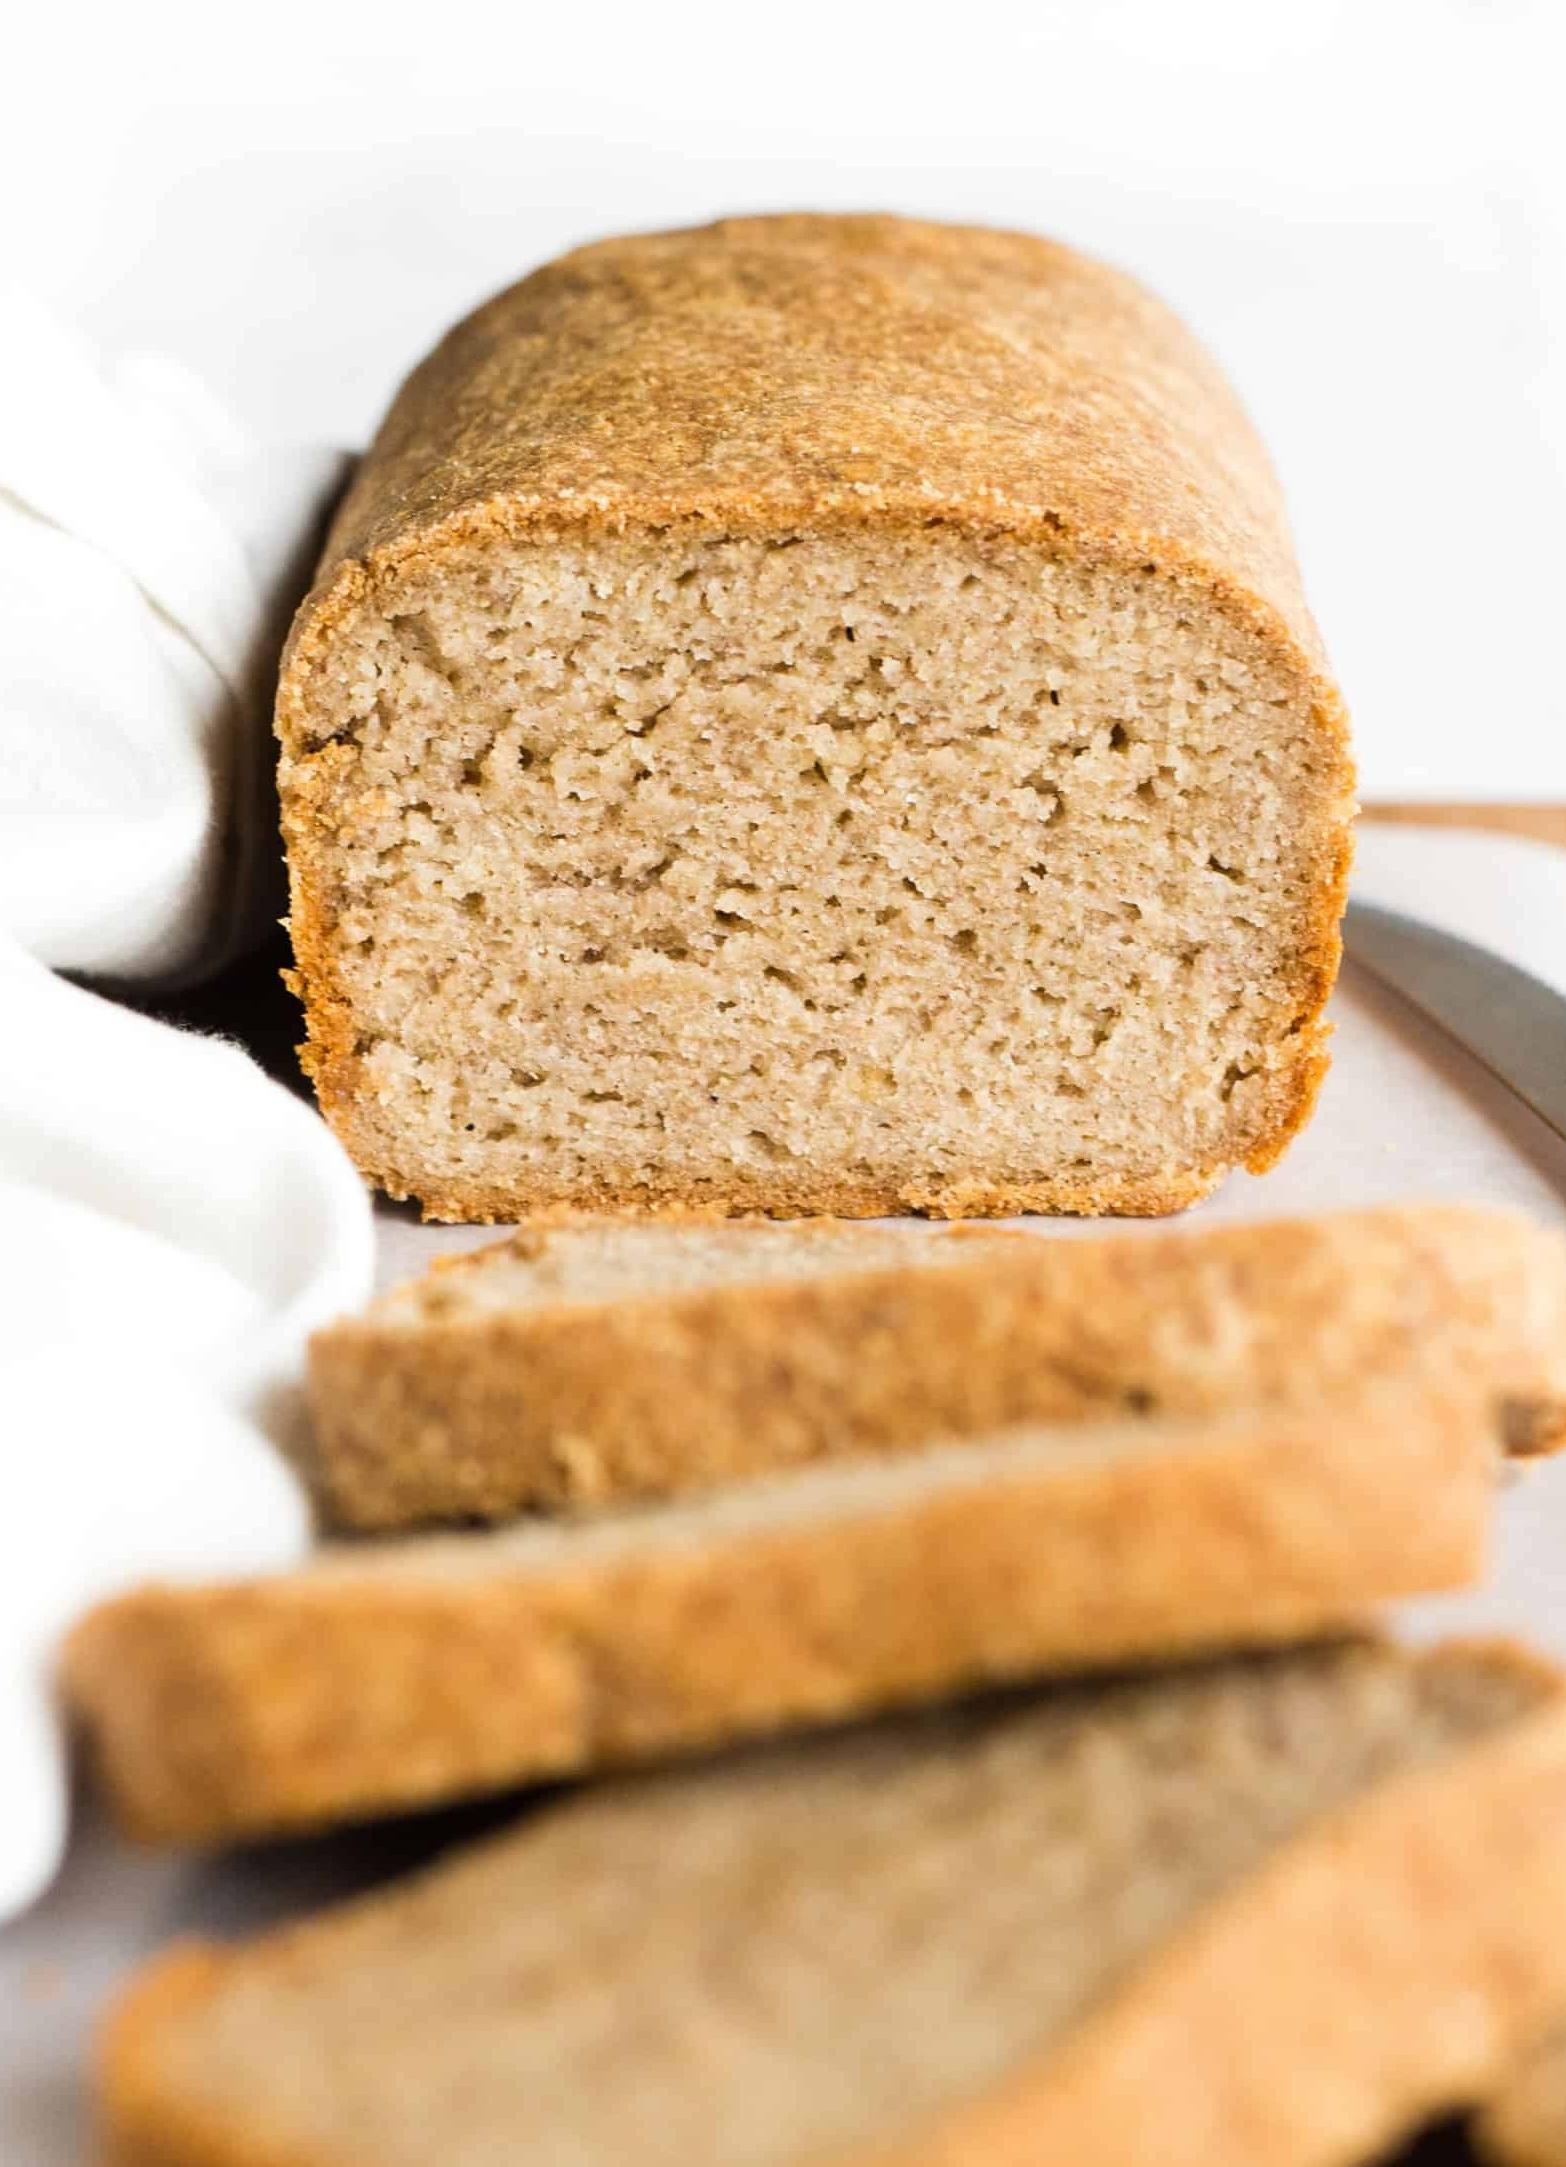  Get a crispy crust and a soft, fluffy center in every slice of this bread